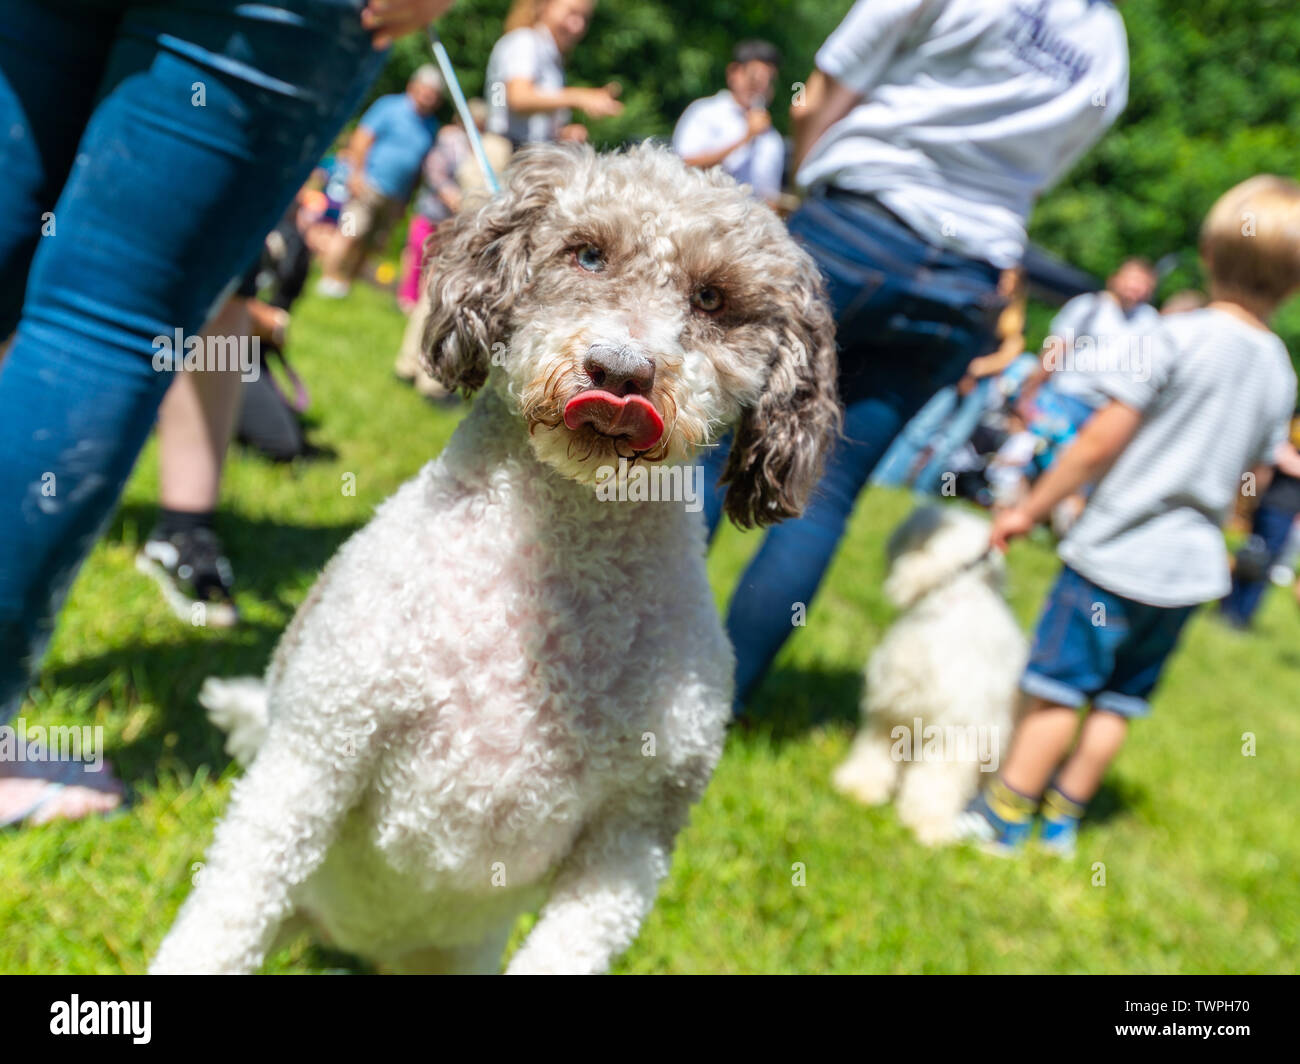 A poodle cross cockapoo dog is an entrant in a dog show at Sandy Balls New Forest Holiday Village, Fordingbridge, Hampshire, UK, June 2019. Stock Photo